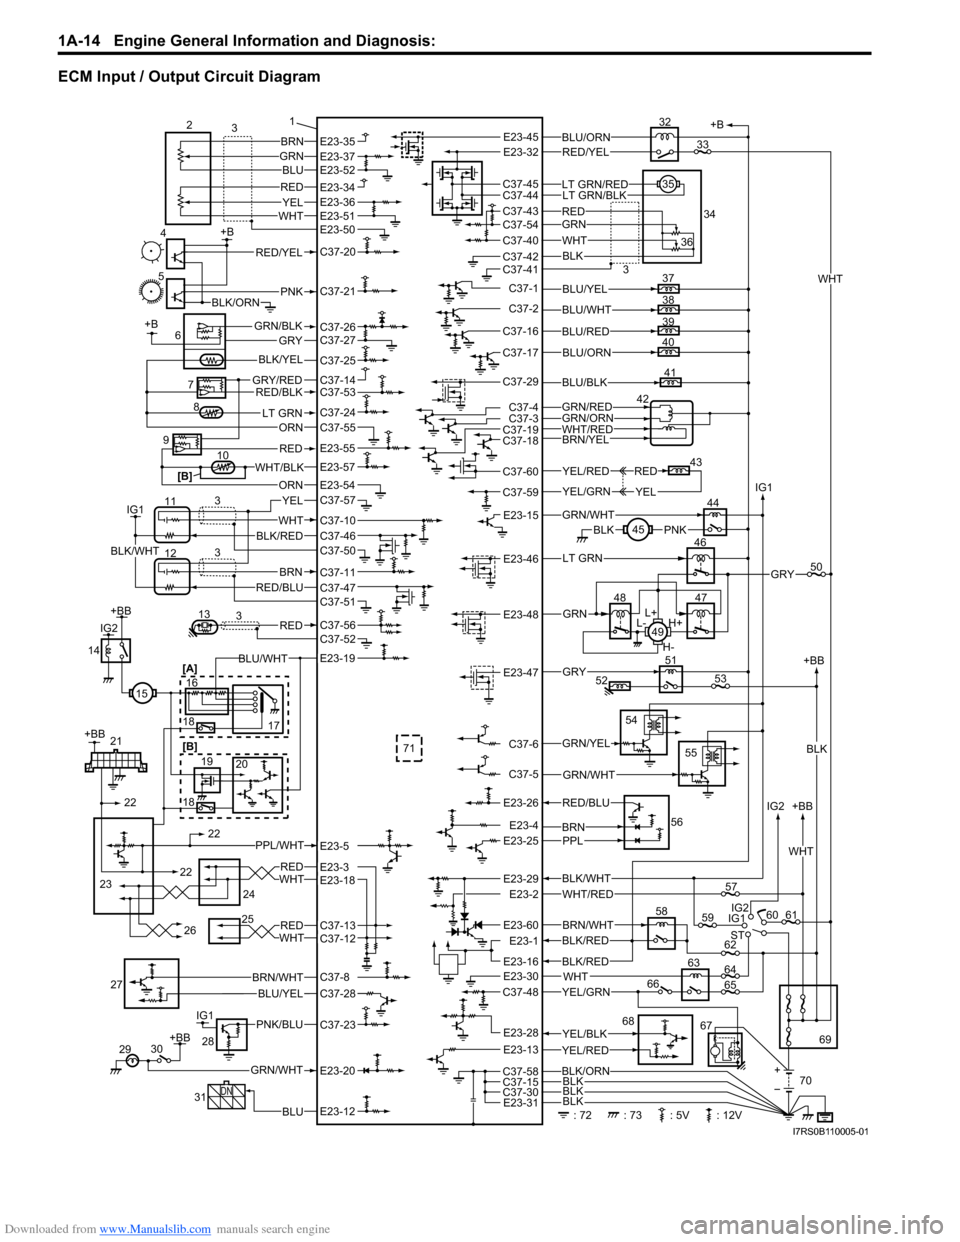 SUZUKI SWIFT 2006 2.G Service Workshop Manual Downloaded from www.Manualslib.com manuals search engine 1A-14 Engine General Information and Diagnosis: 
ECM Input / Output Circuit Diagram
+B
58
IG1 +BB
ST IG2 IG2
60 61
69
BLK/WHT
WHT/RED
BRN/WHTBL